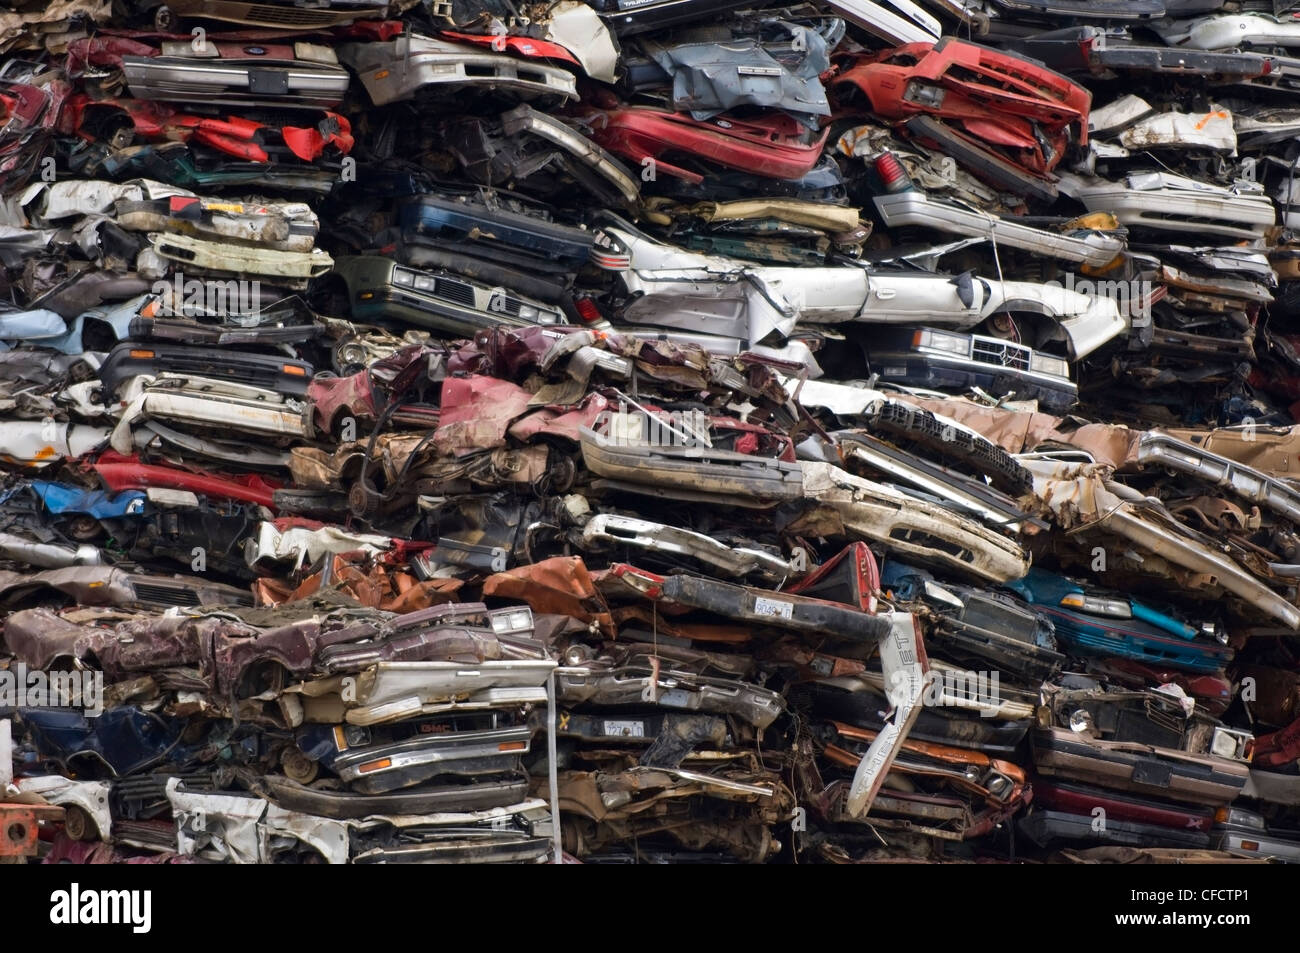 Stacks of obsolete cars in recycling yard, Vancouver Island, British Columbia, Canada Stock Photo